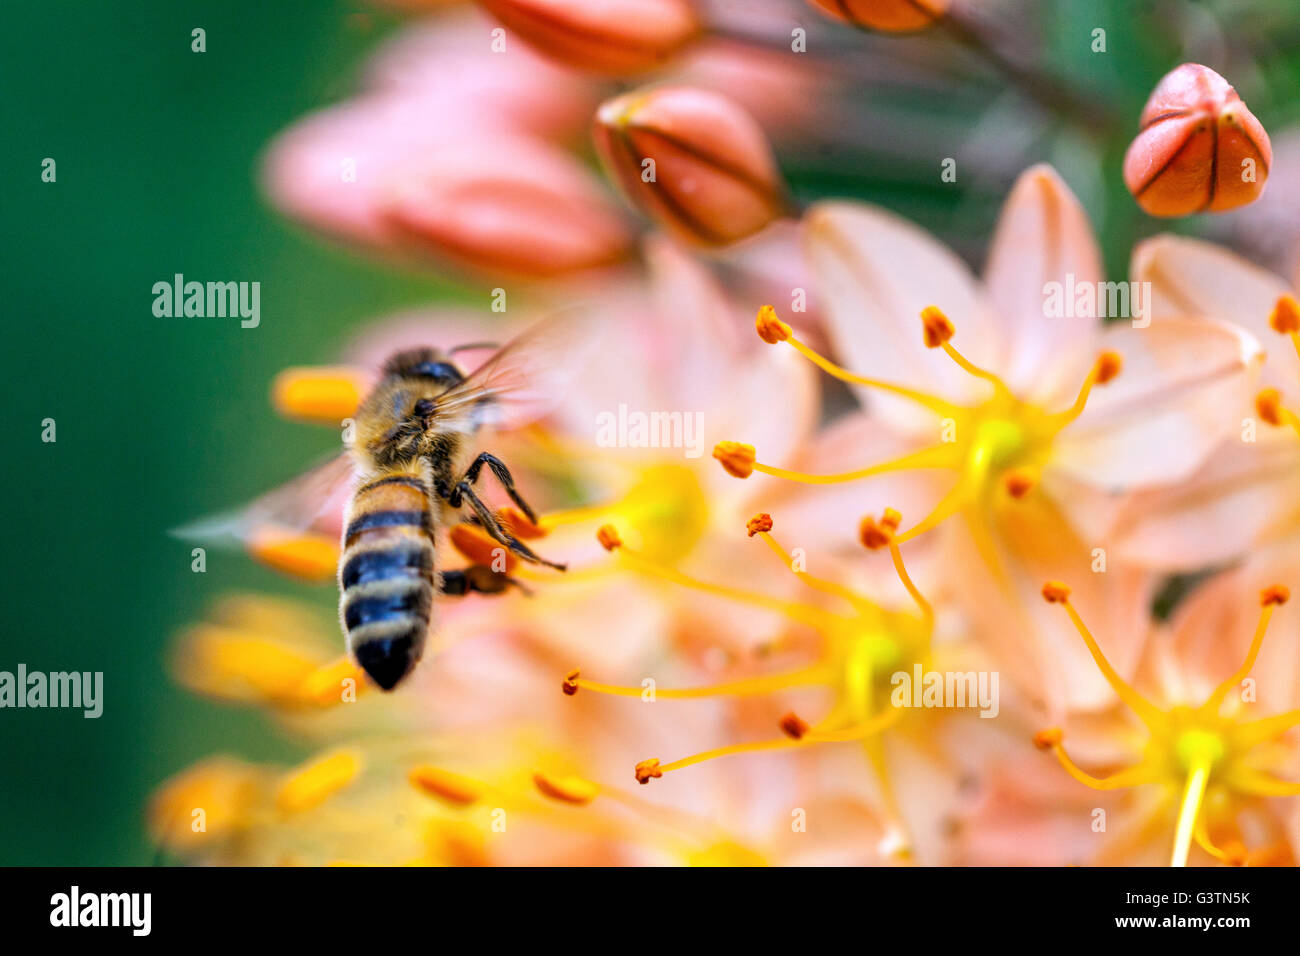 Honey Bee on flower Eremurus Cleopatra Foxtail Lily, Desert Candle Stock Photo